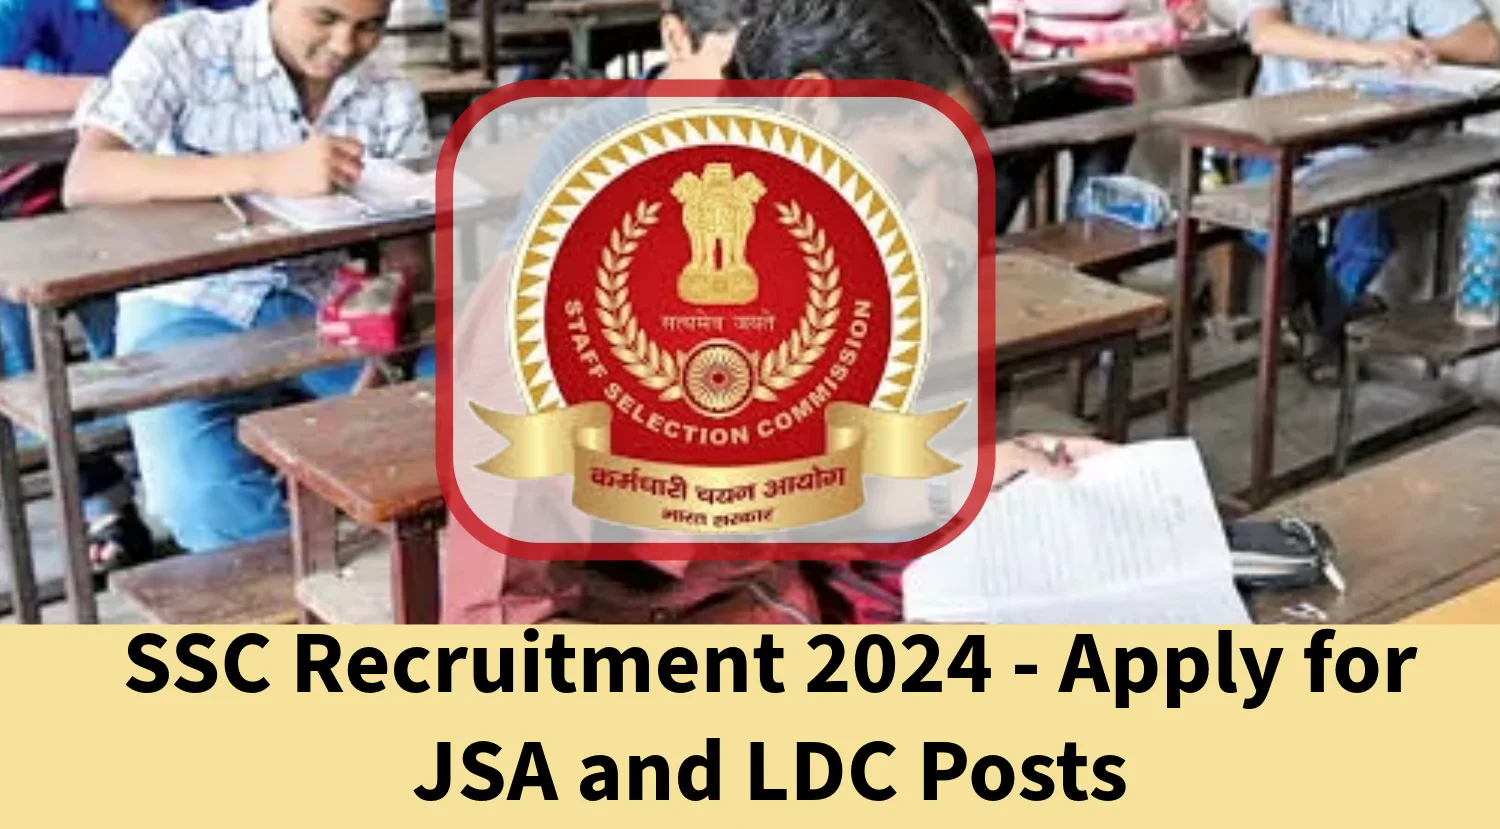 SSC Recruitment 2024 Apply for JSA and LDC Posts